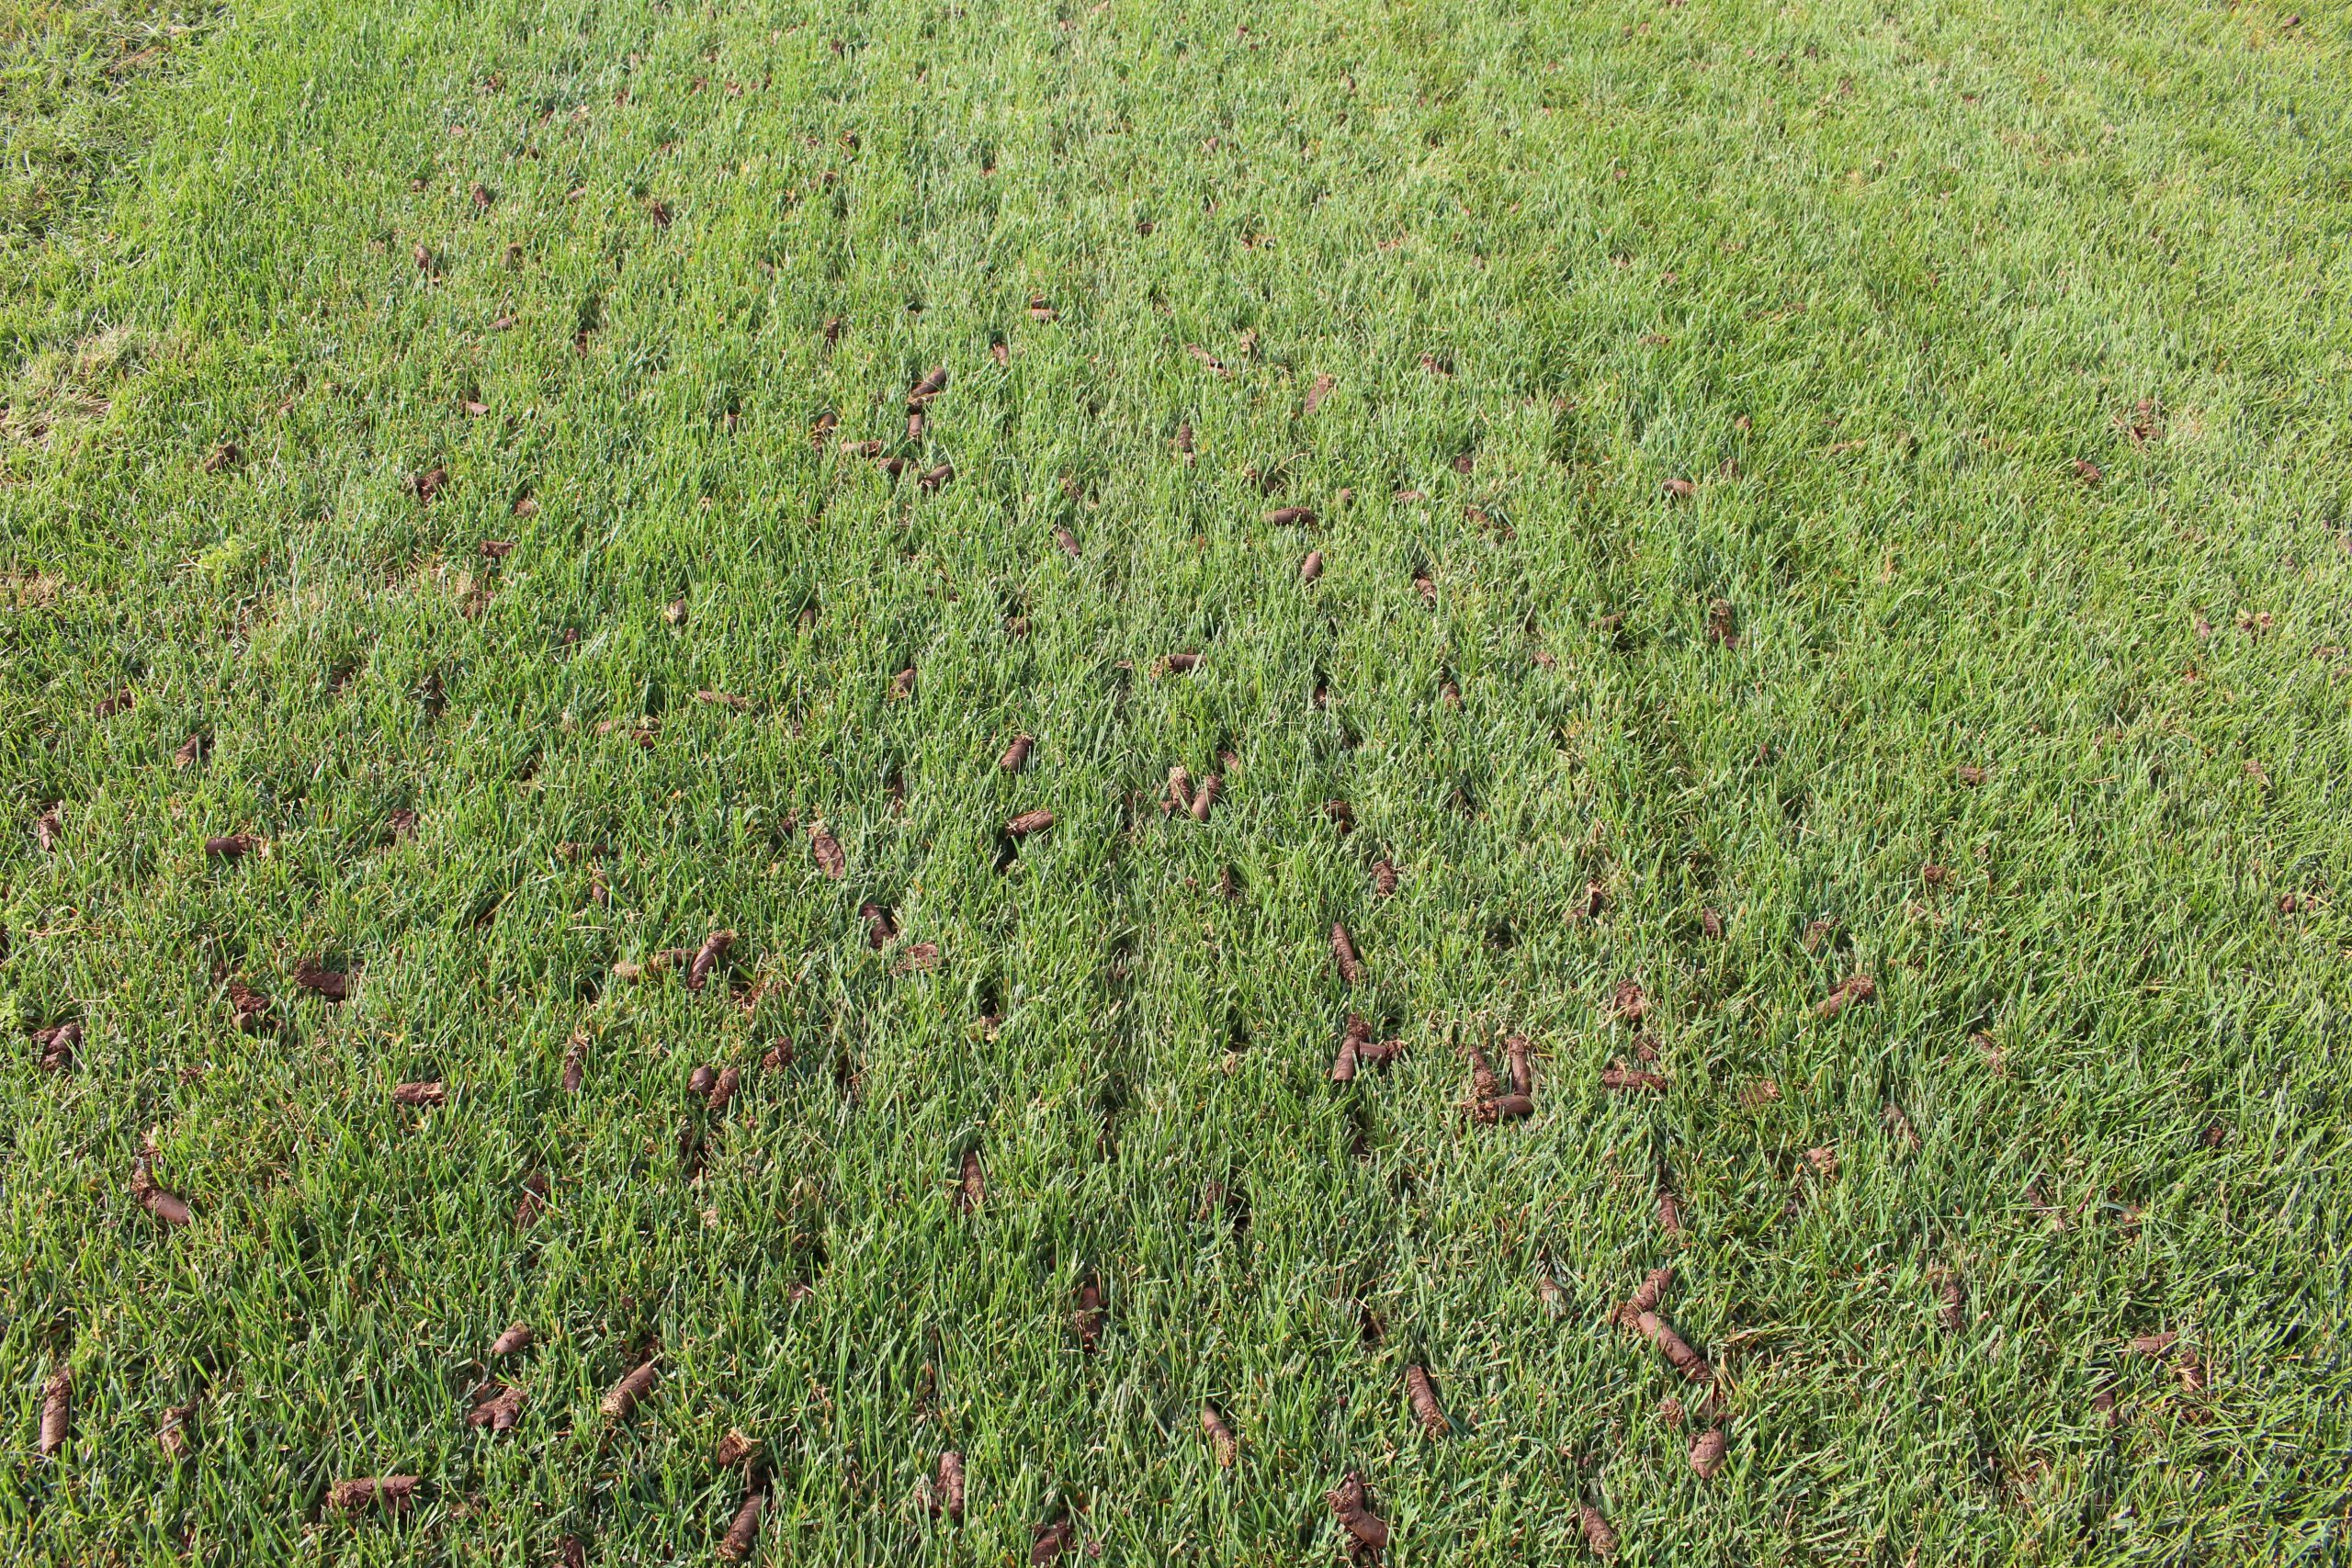 Benefits of Core Aeration and Over Seeding